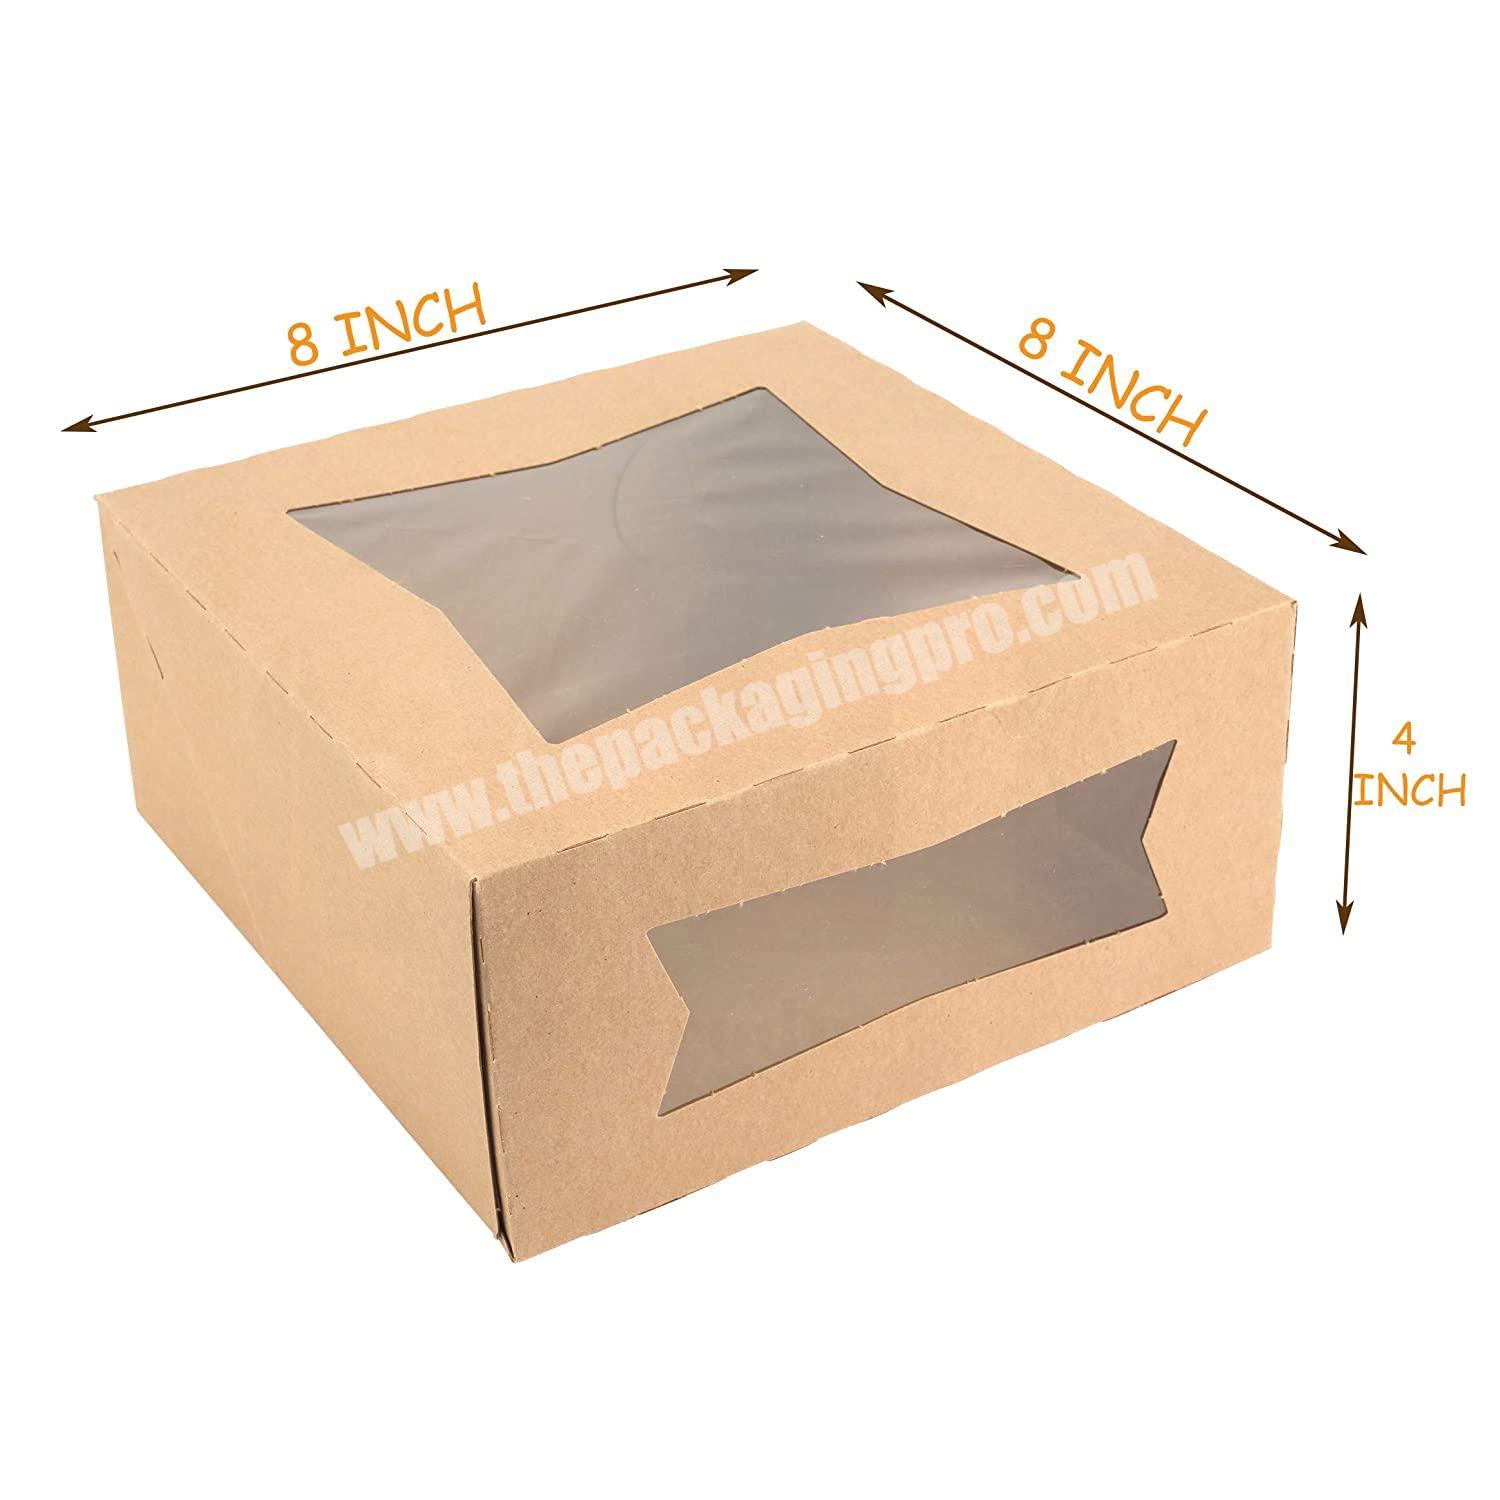 Custom White with Clear Display Viewing Window small 8x8x4 Bakery Gif Delivery Packaging Cake Cookie Boxes